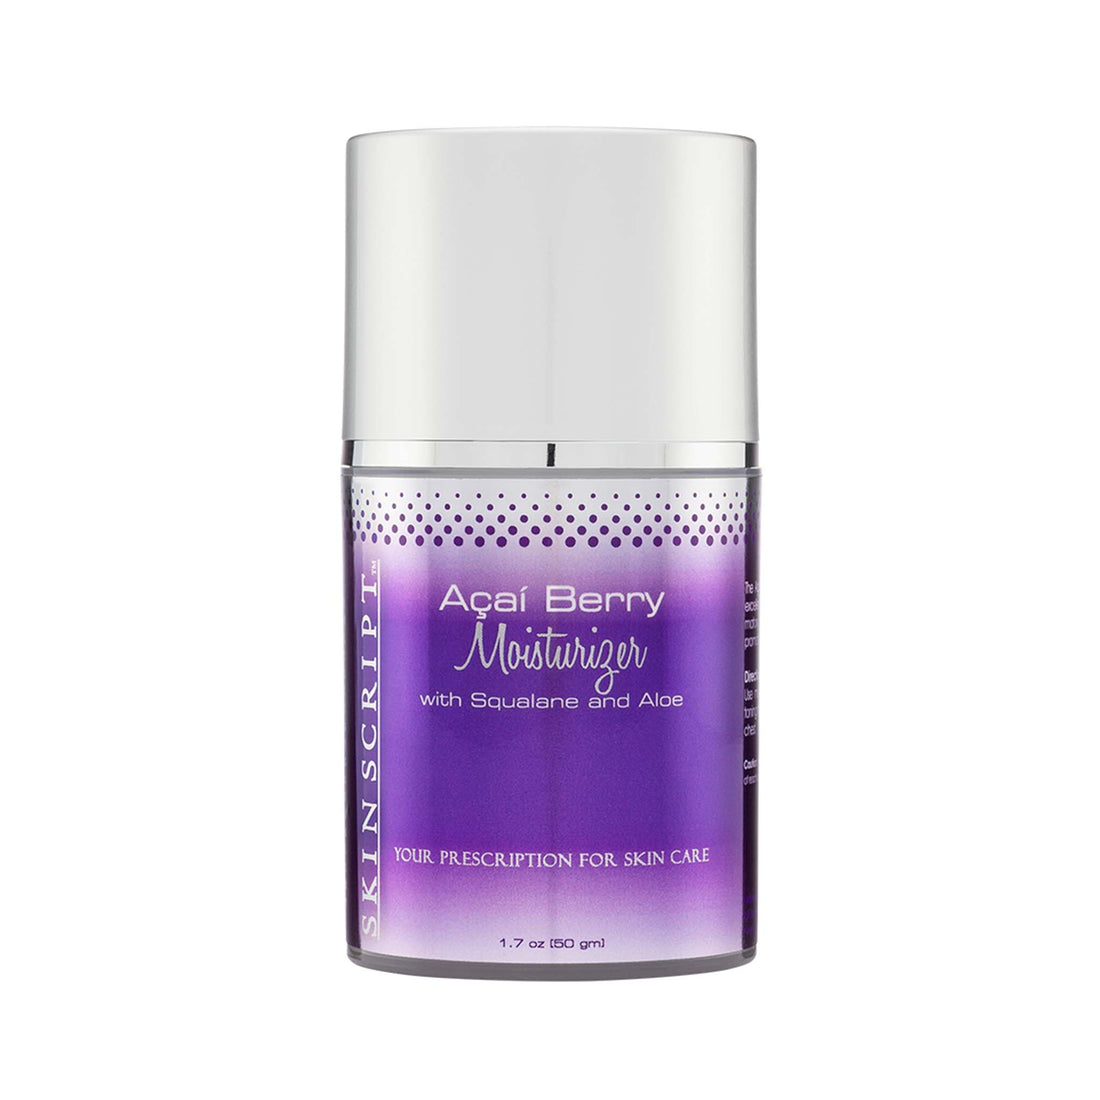 Skin Script Acai Berry Moisturizer relieves surface signs of aging with intense hydration and boosting collagen. 